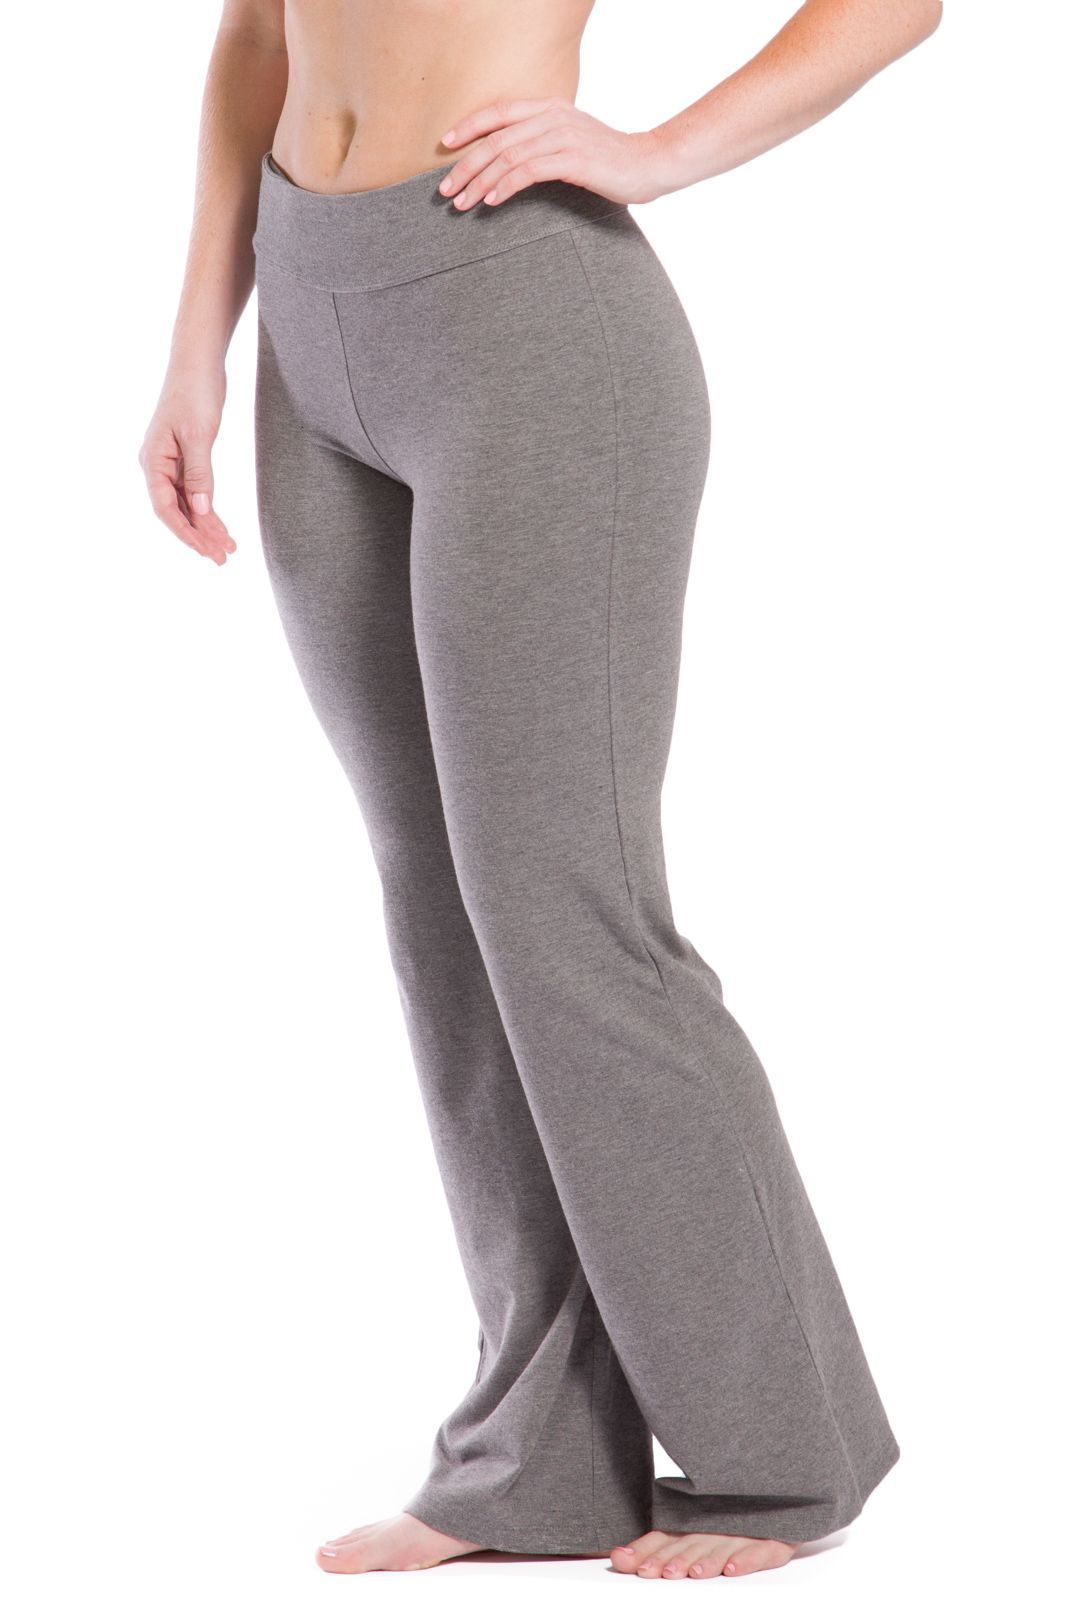 Up To 87% Off on Women Boot Cut Yoga Pants Run